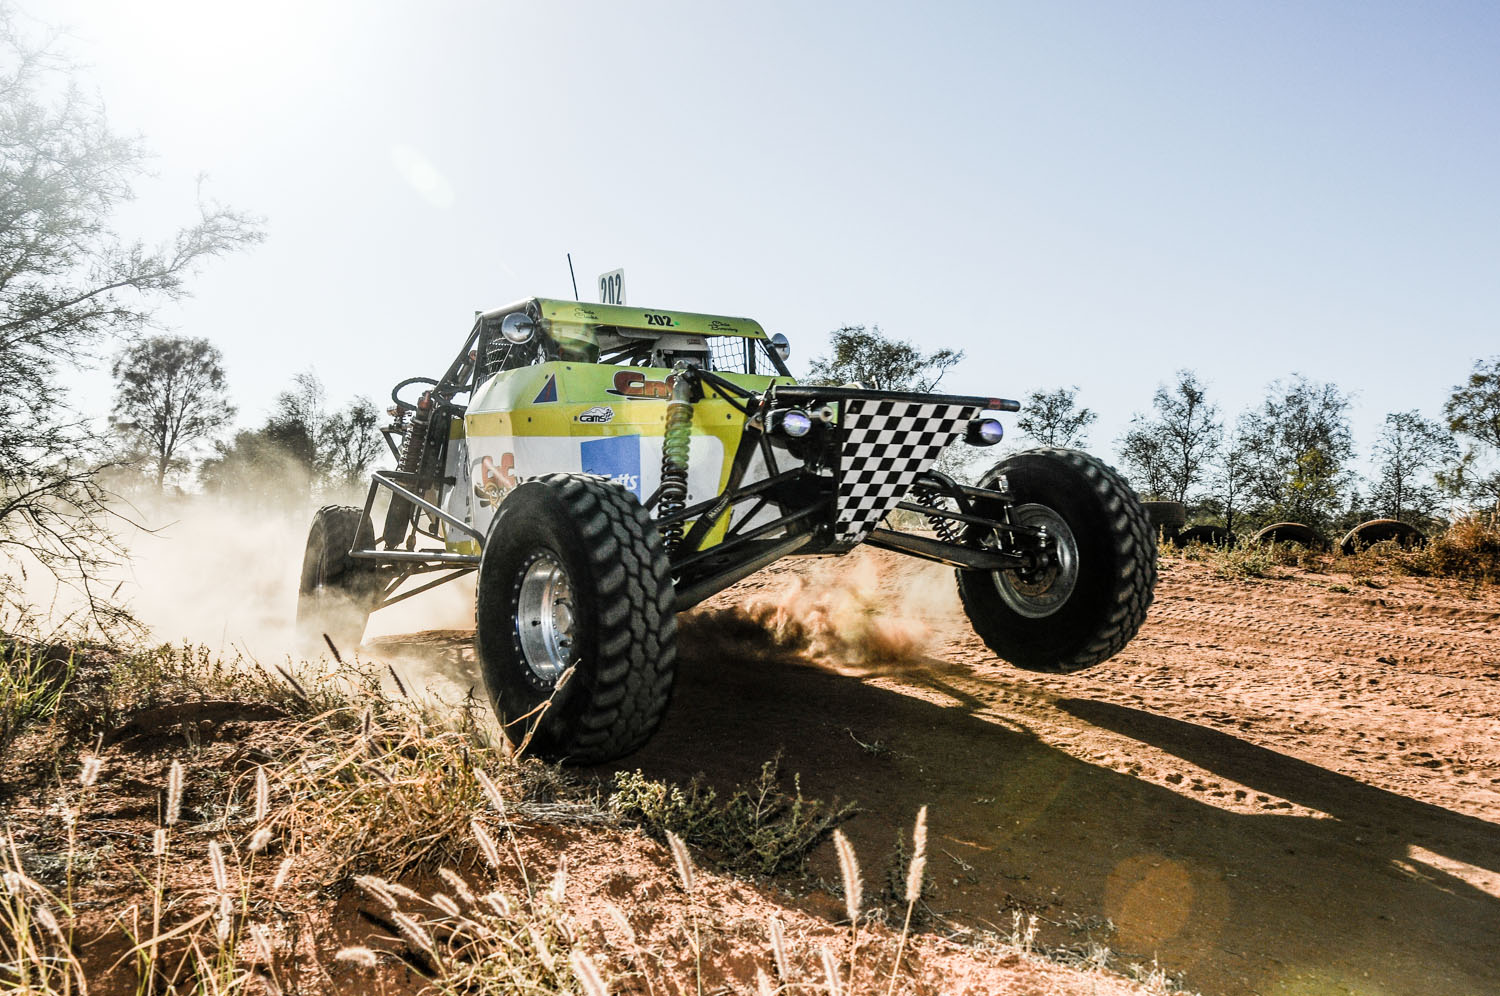 Chris Browning on the charge in his Super1650 Lothringer